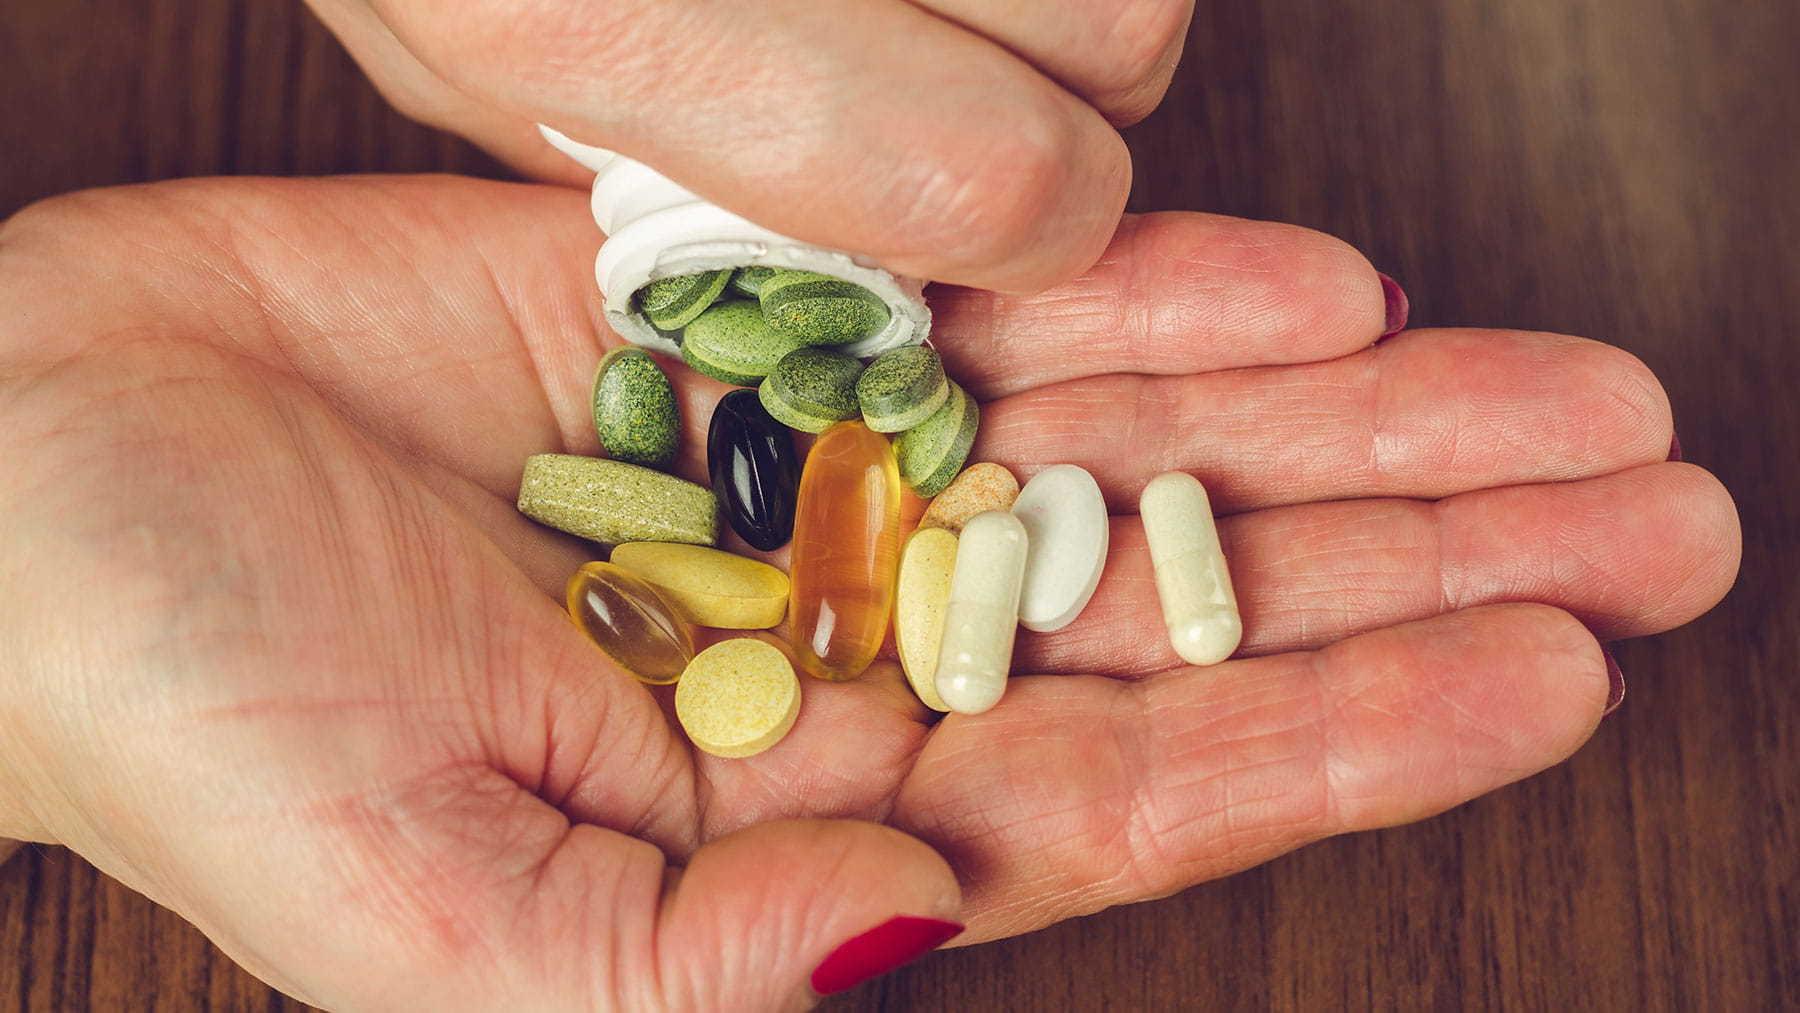 Is it possible to take too many vitamins? | Ohio State Medical News